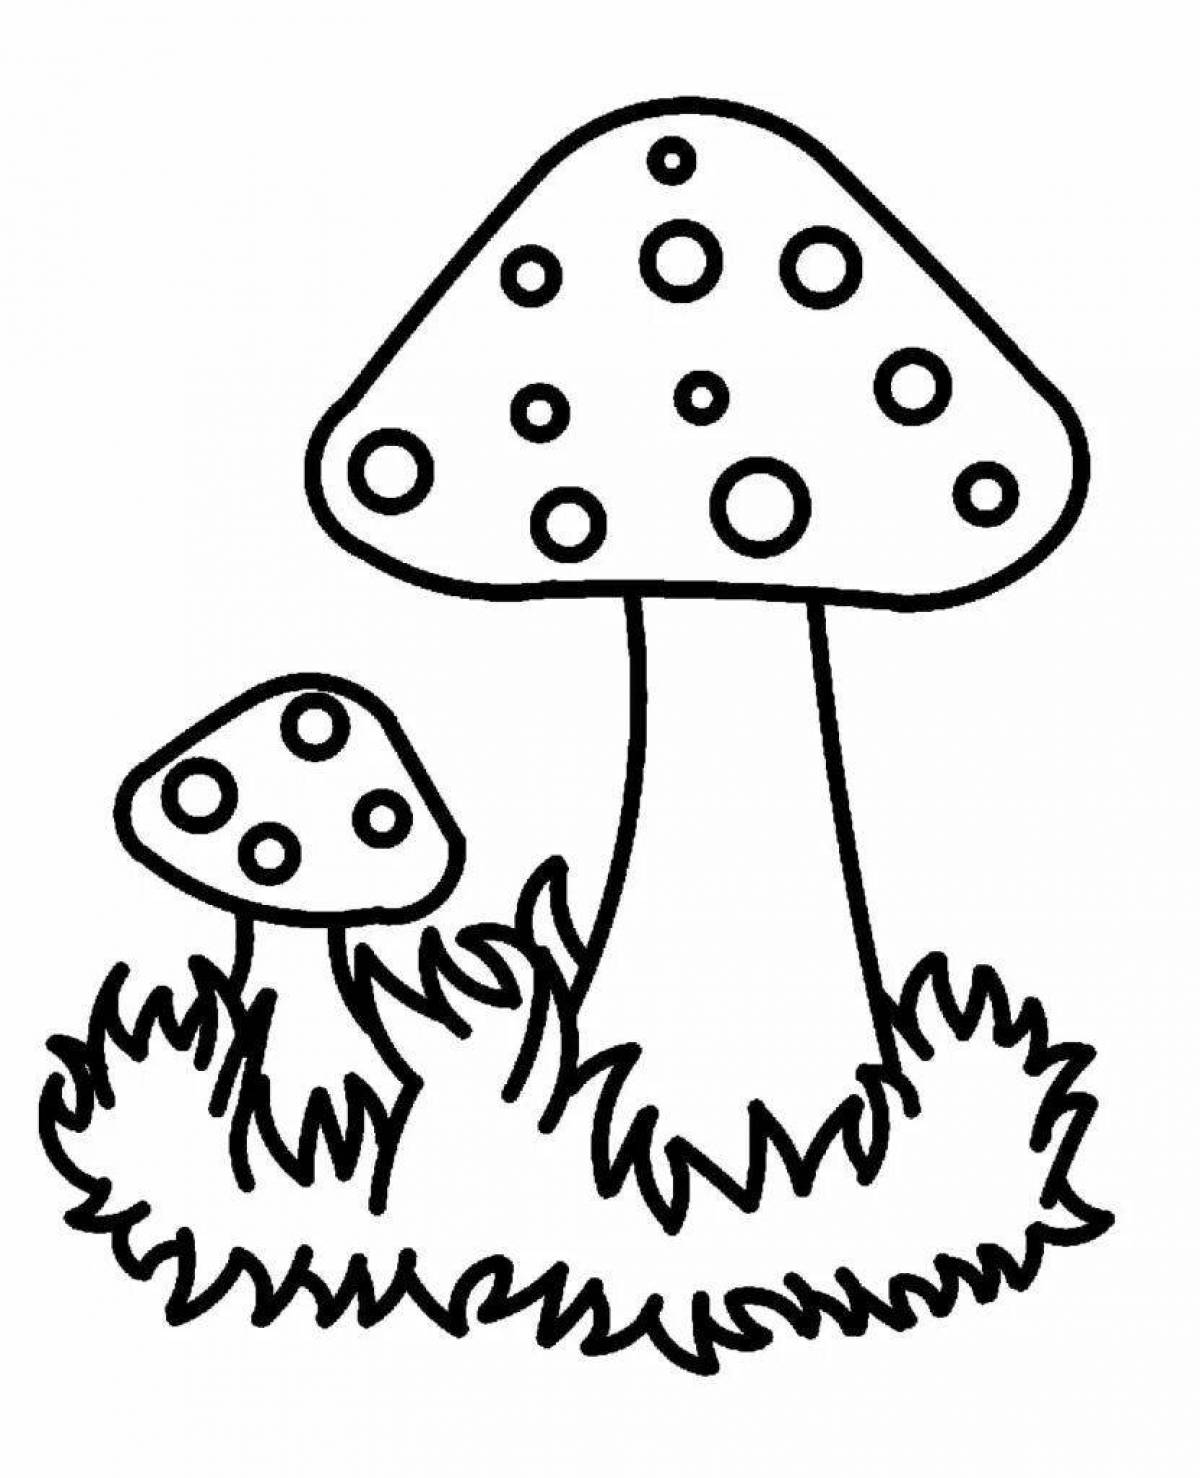 Amazing fly agaric coloring page